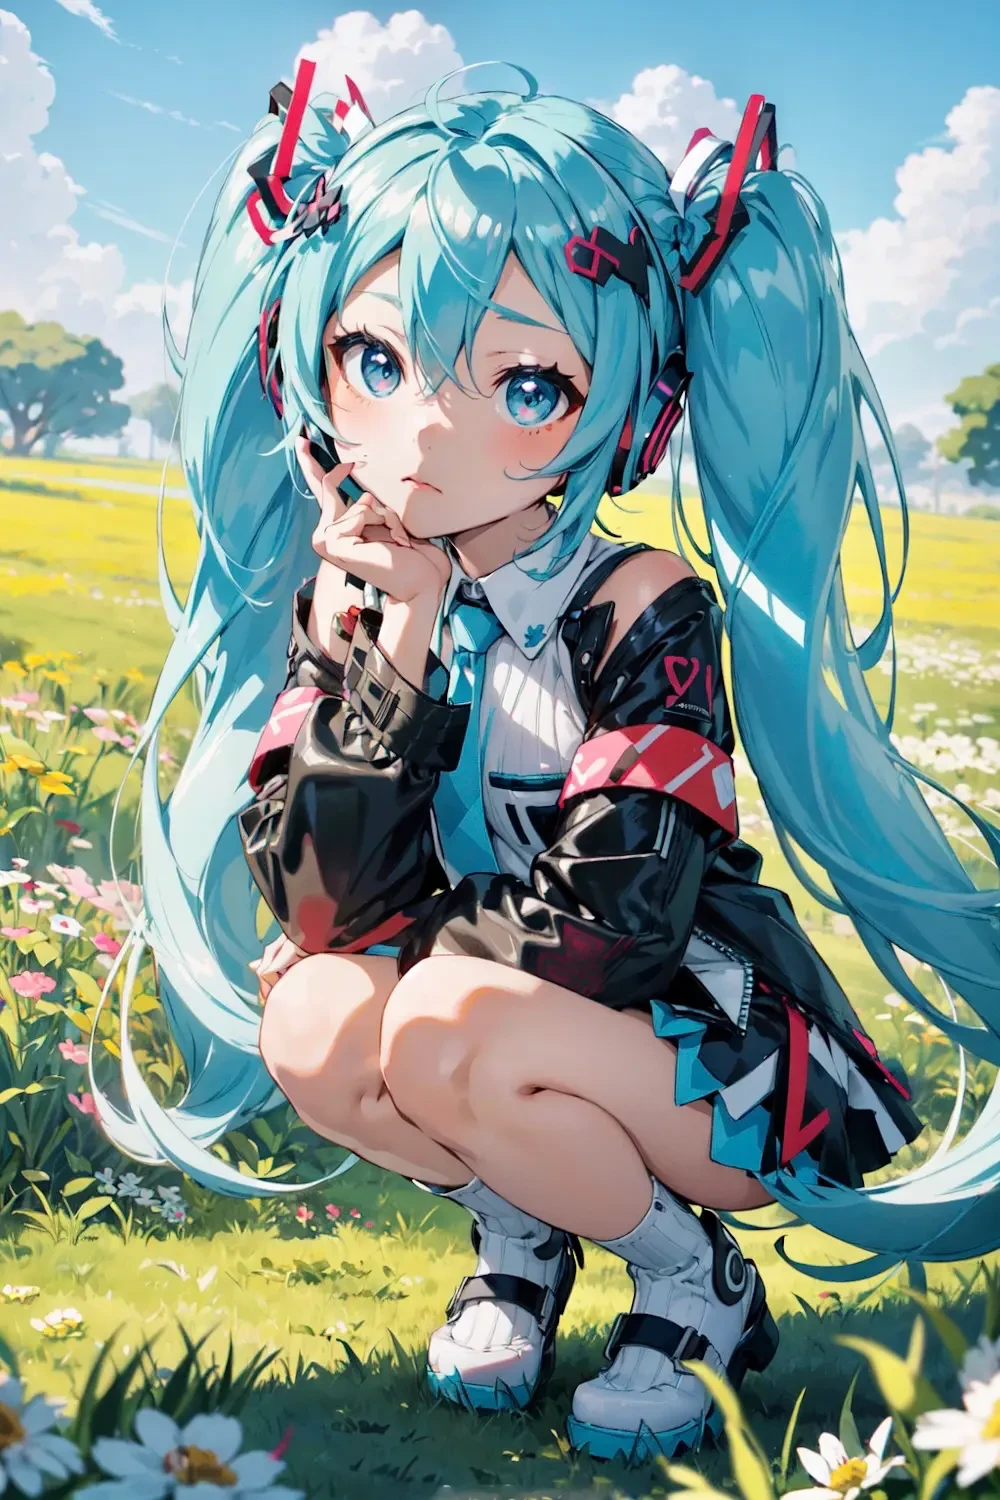 hatsune-miku-anime-style-all-ages-25